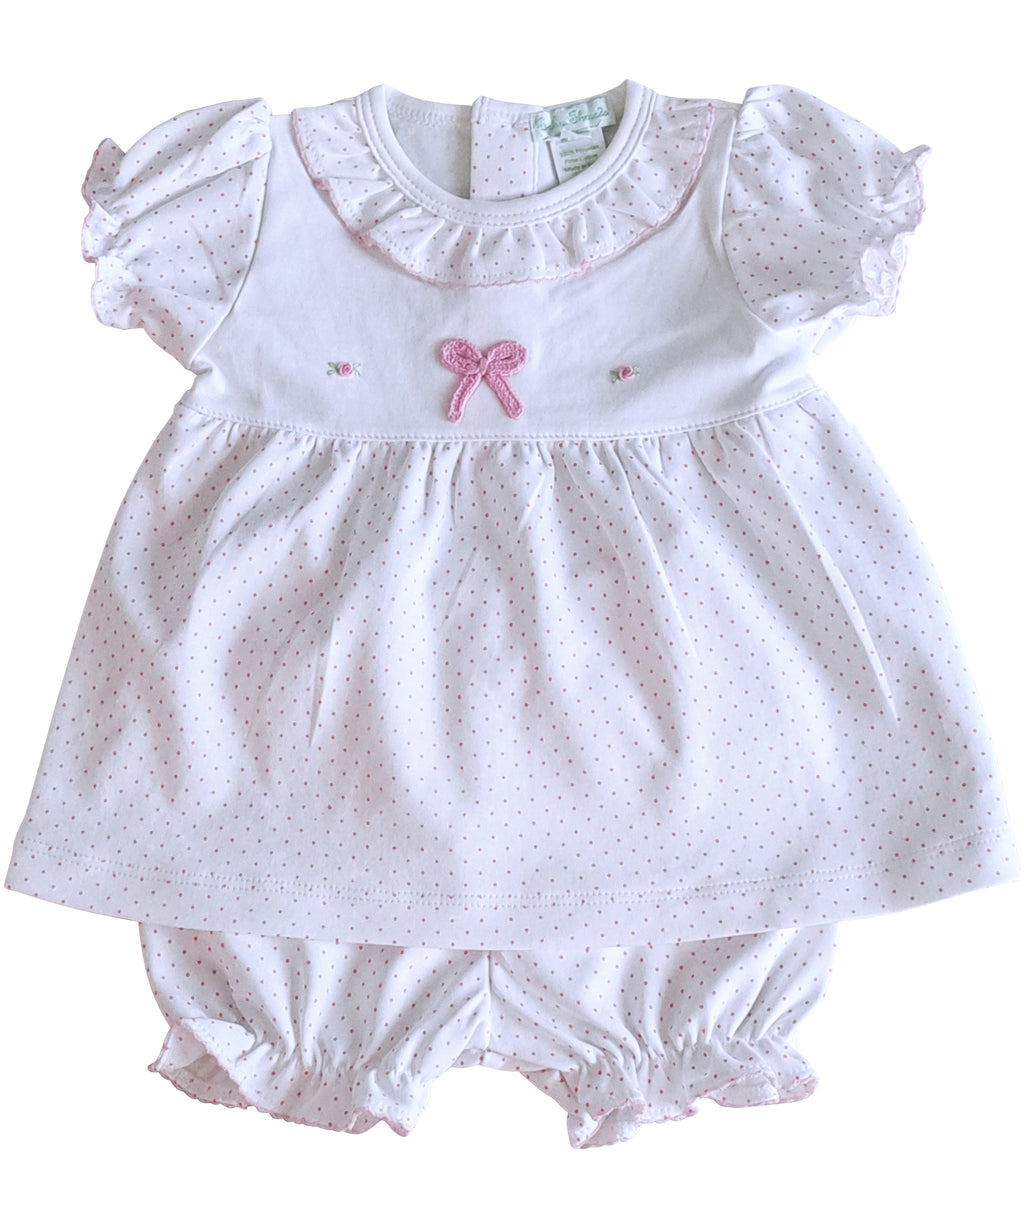 Baby Girl's Pink Bows Dress - Little Threads Inc. Children's Clothing